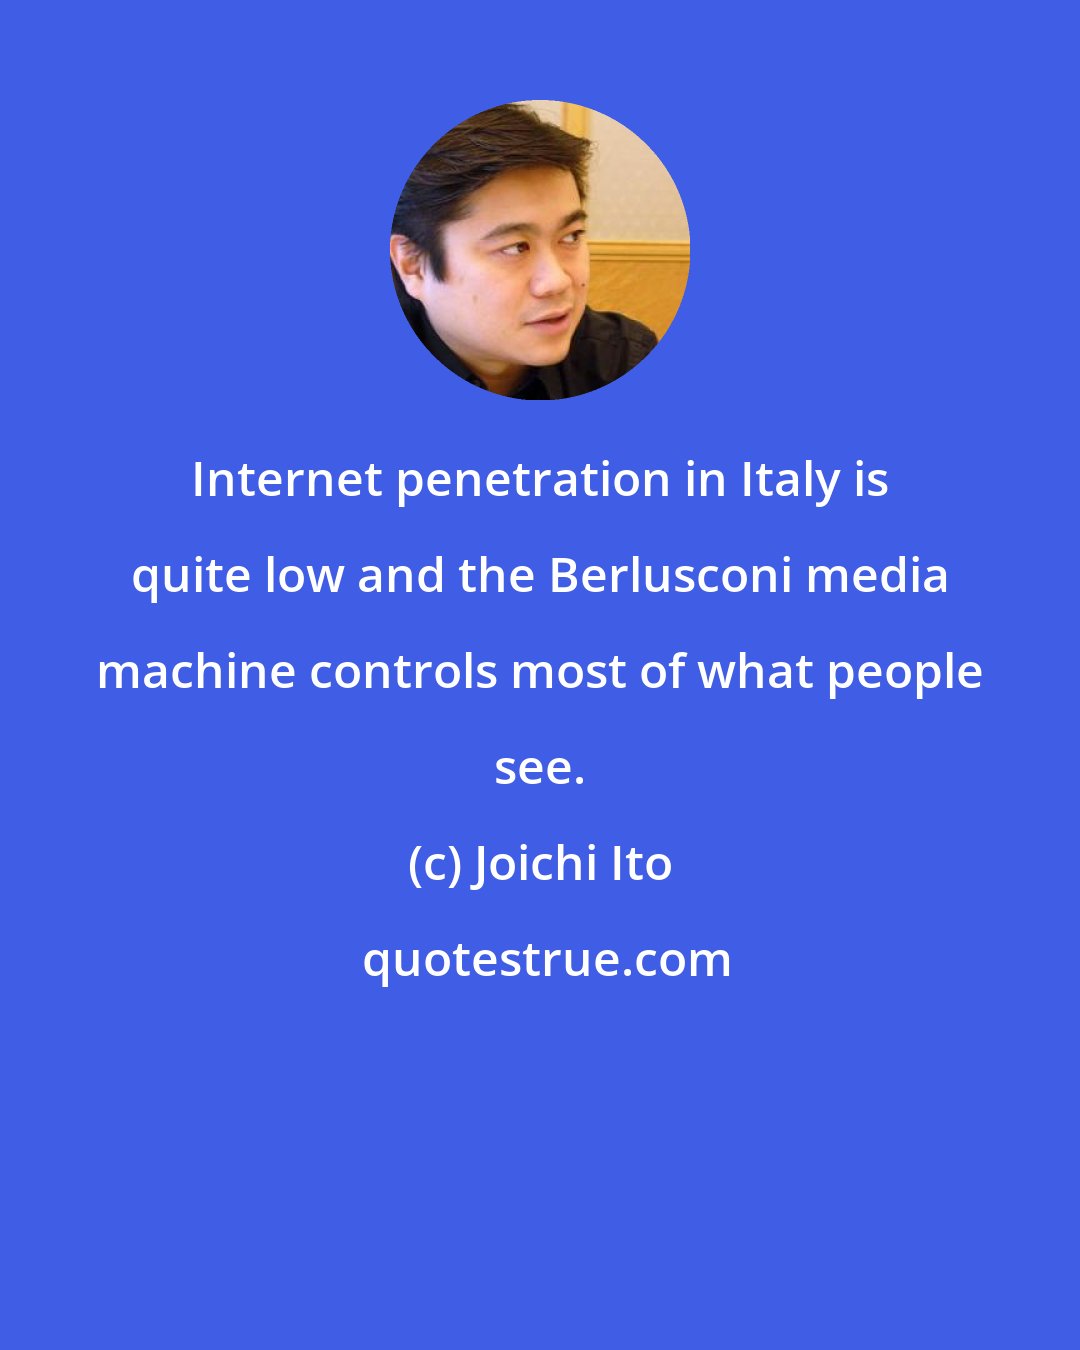 Joichi Ito: Internet penetration in Italy is quite low and the Berlusconi media machine controls most of what people see.